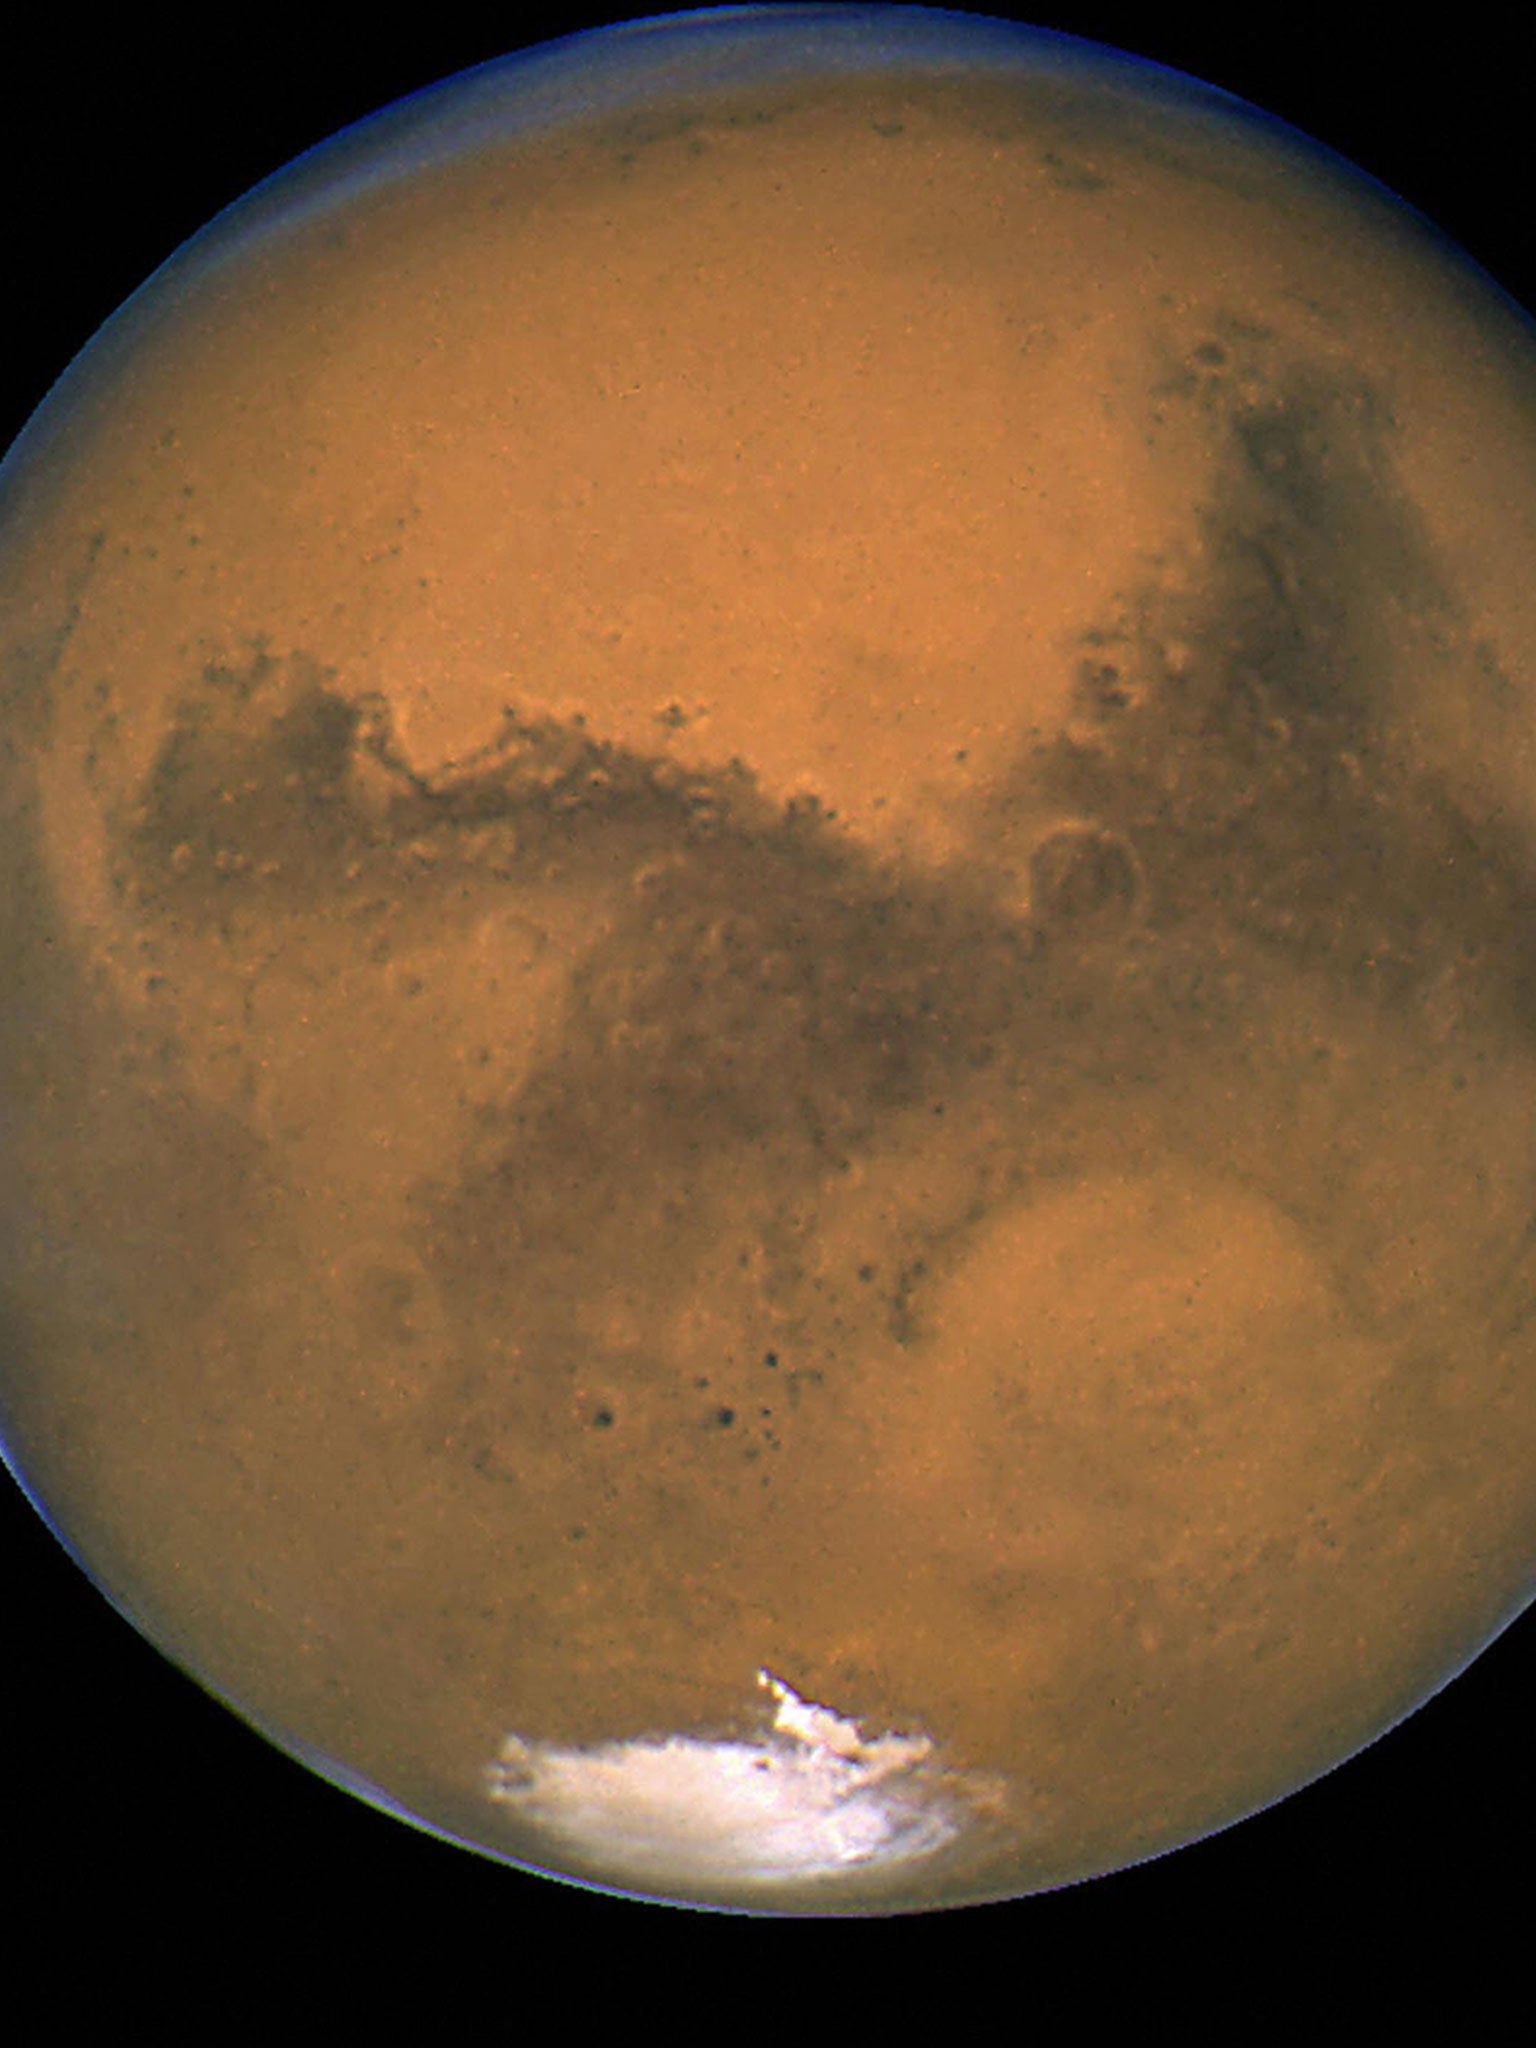 Growing evidence is suggesting that life on Earth may have actually begun on Mars, pictured.